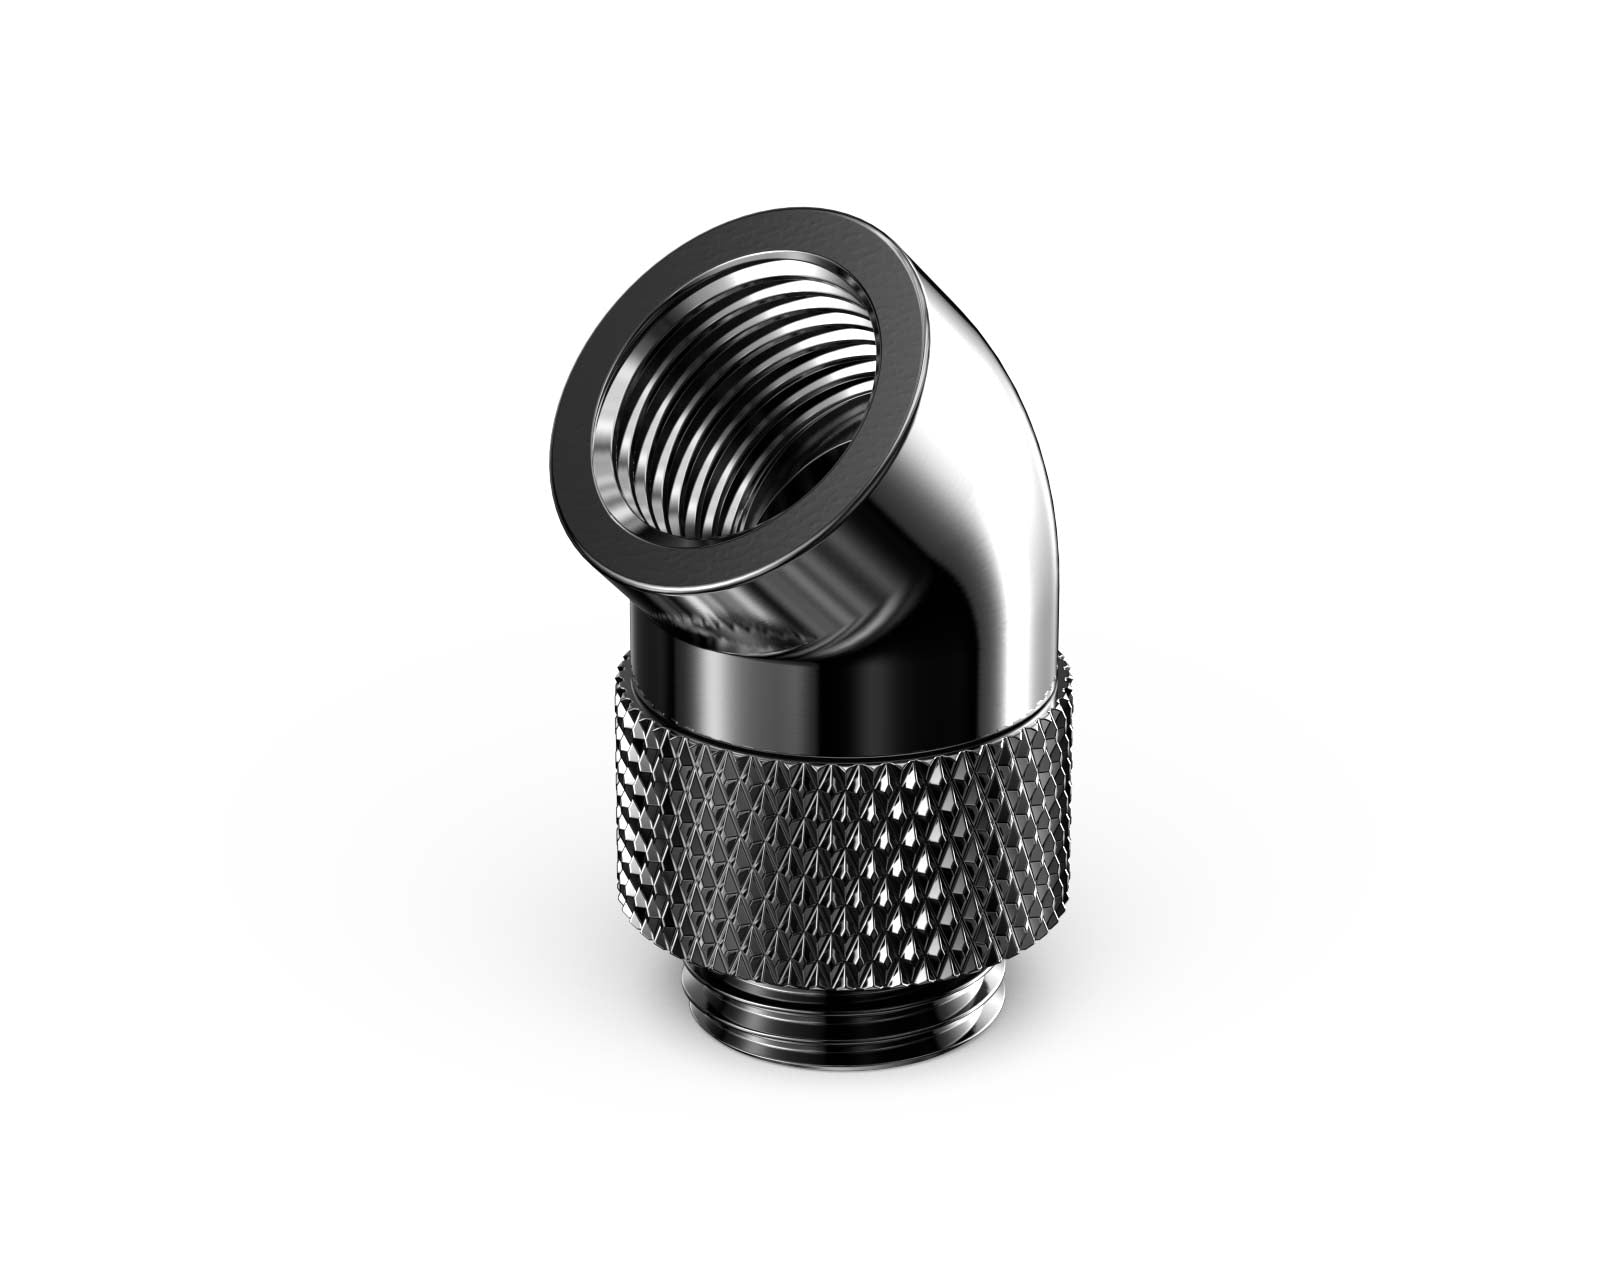 PrimoChill Male to Female G 1/4in. 45 Degree SX Rotary Elbow Fitting - PrimoChill - KEEPING IT COOL Dark Nickel